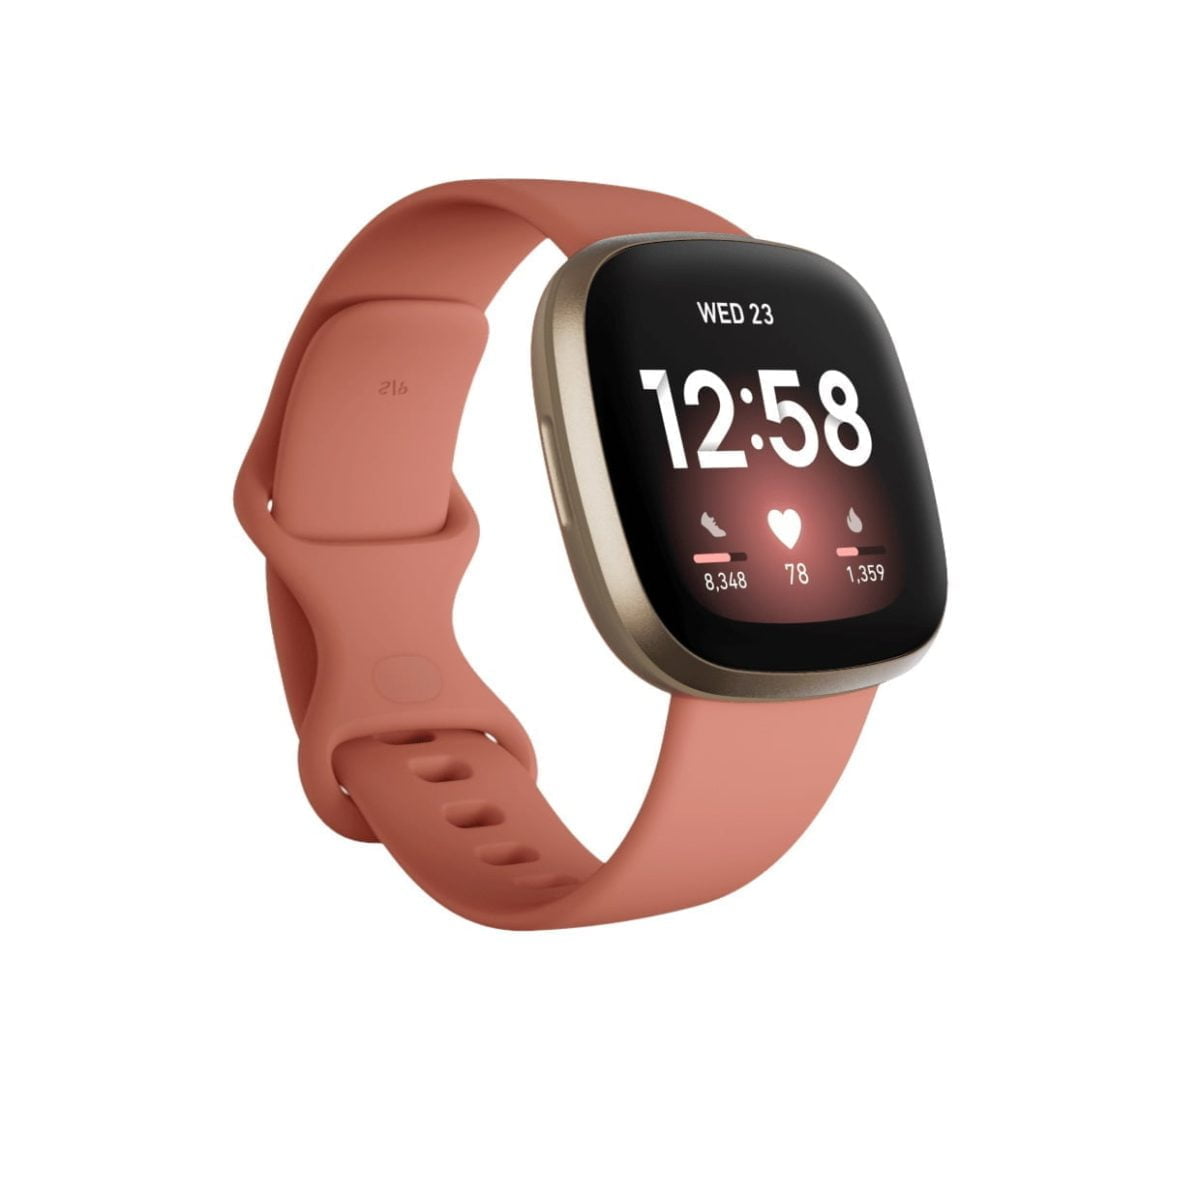 1 Fitbit &Lt;H1&Gt;Fitbit Versa 3, Health &Amp; Fitness Smartwatch With Gps, Pink Clay / Soft Gold Aluminum&Lt;/H1&Gt; Https://Youtu.be/Ihx_Bl3Yqlc &Lt;Div Class=&Quot;Product-Specs-Desc__Text&Quot;&Gt; Meet Fitbit Versa 3, The Motivational Health &Amp; Fitness Smartwatch With Built-In Gps, Active Zone Minutes And Music Experiences To Keep You Moving. &Lt;/Div&Gt; Fitbit Versa 3 Fitbit Versa 3 Fitness Smartwatch With Gps - Pink Clay / Soft Gold Aluminum